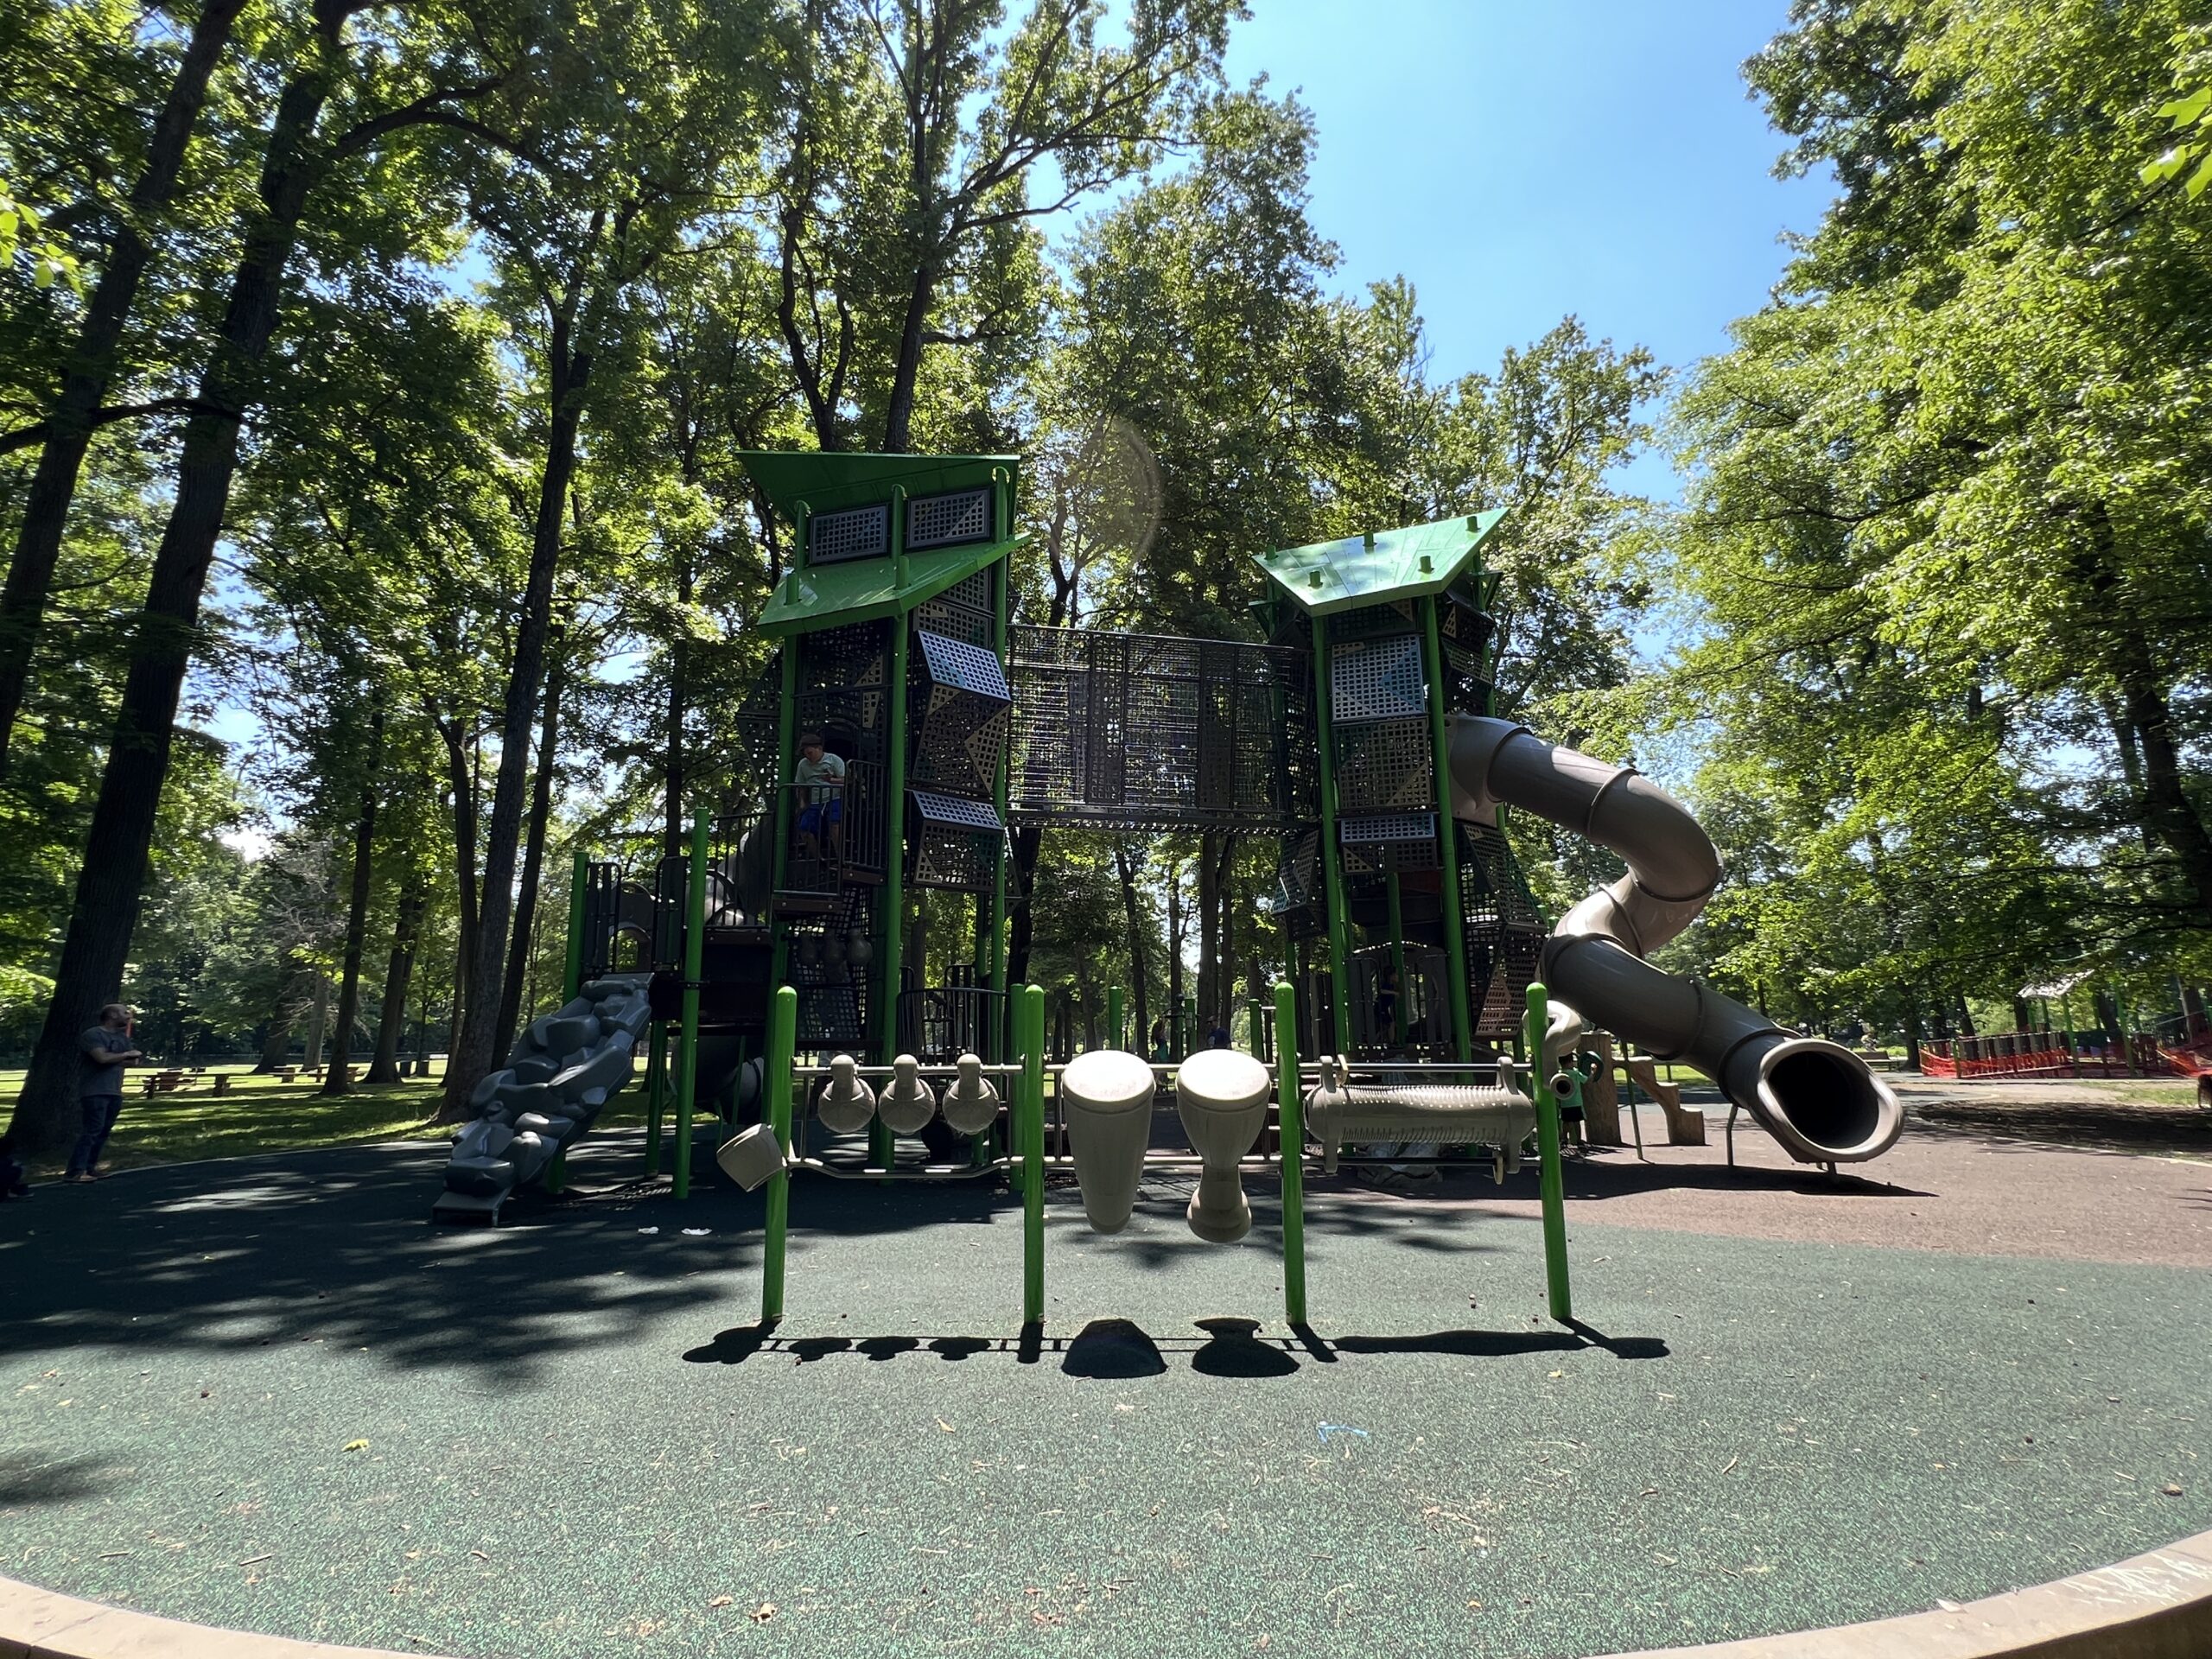 Nomahegan Park Playground in Cranford NJ - WIDE image - large structure side view with musical instruments